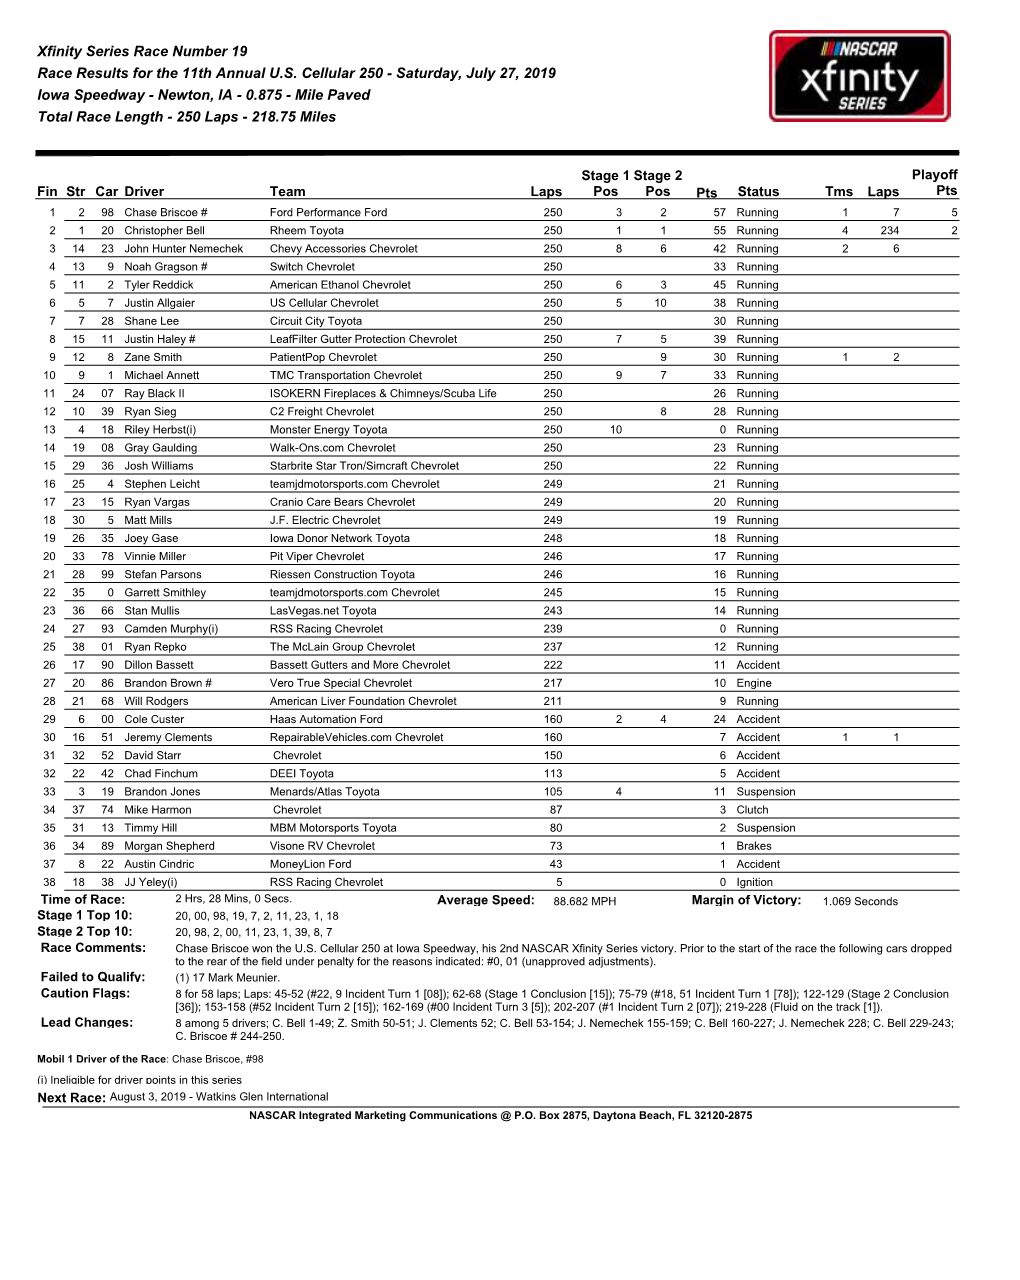 Xfinity Series Race Number 19 Race Results for the 11Th Annual U.S